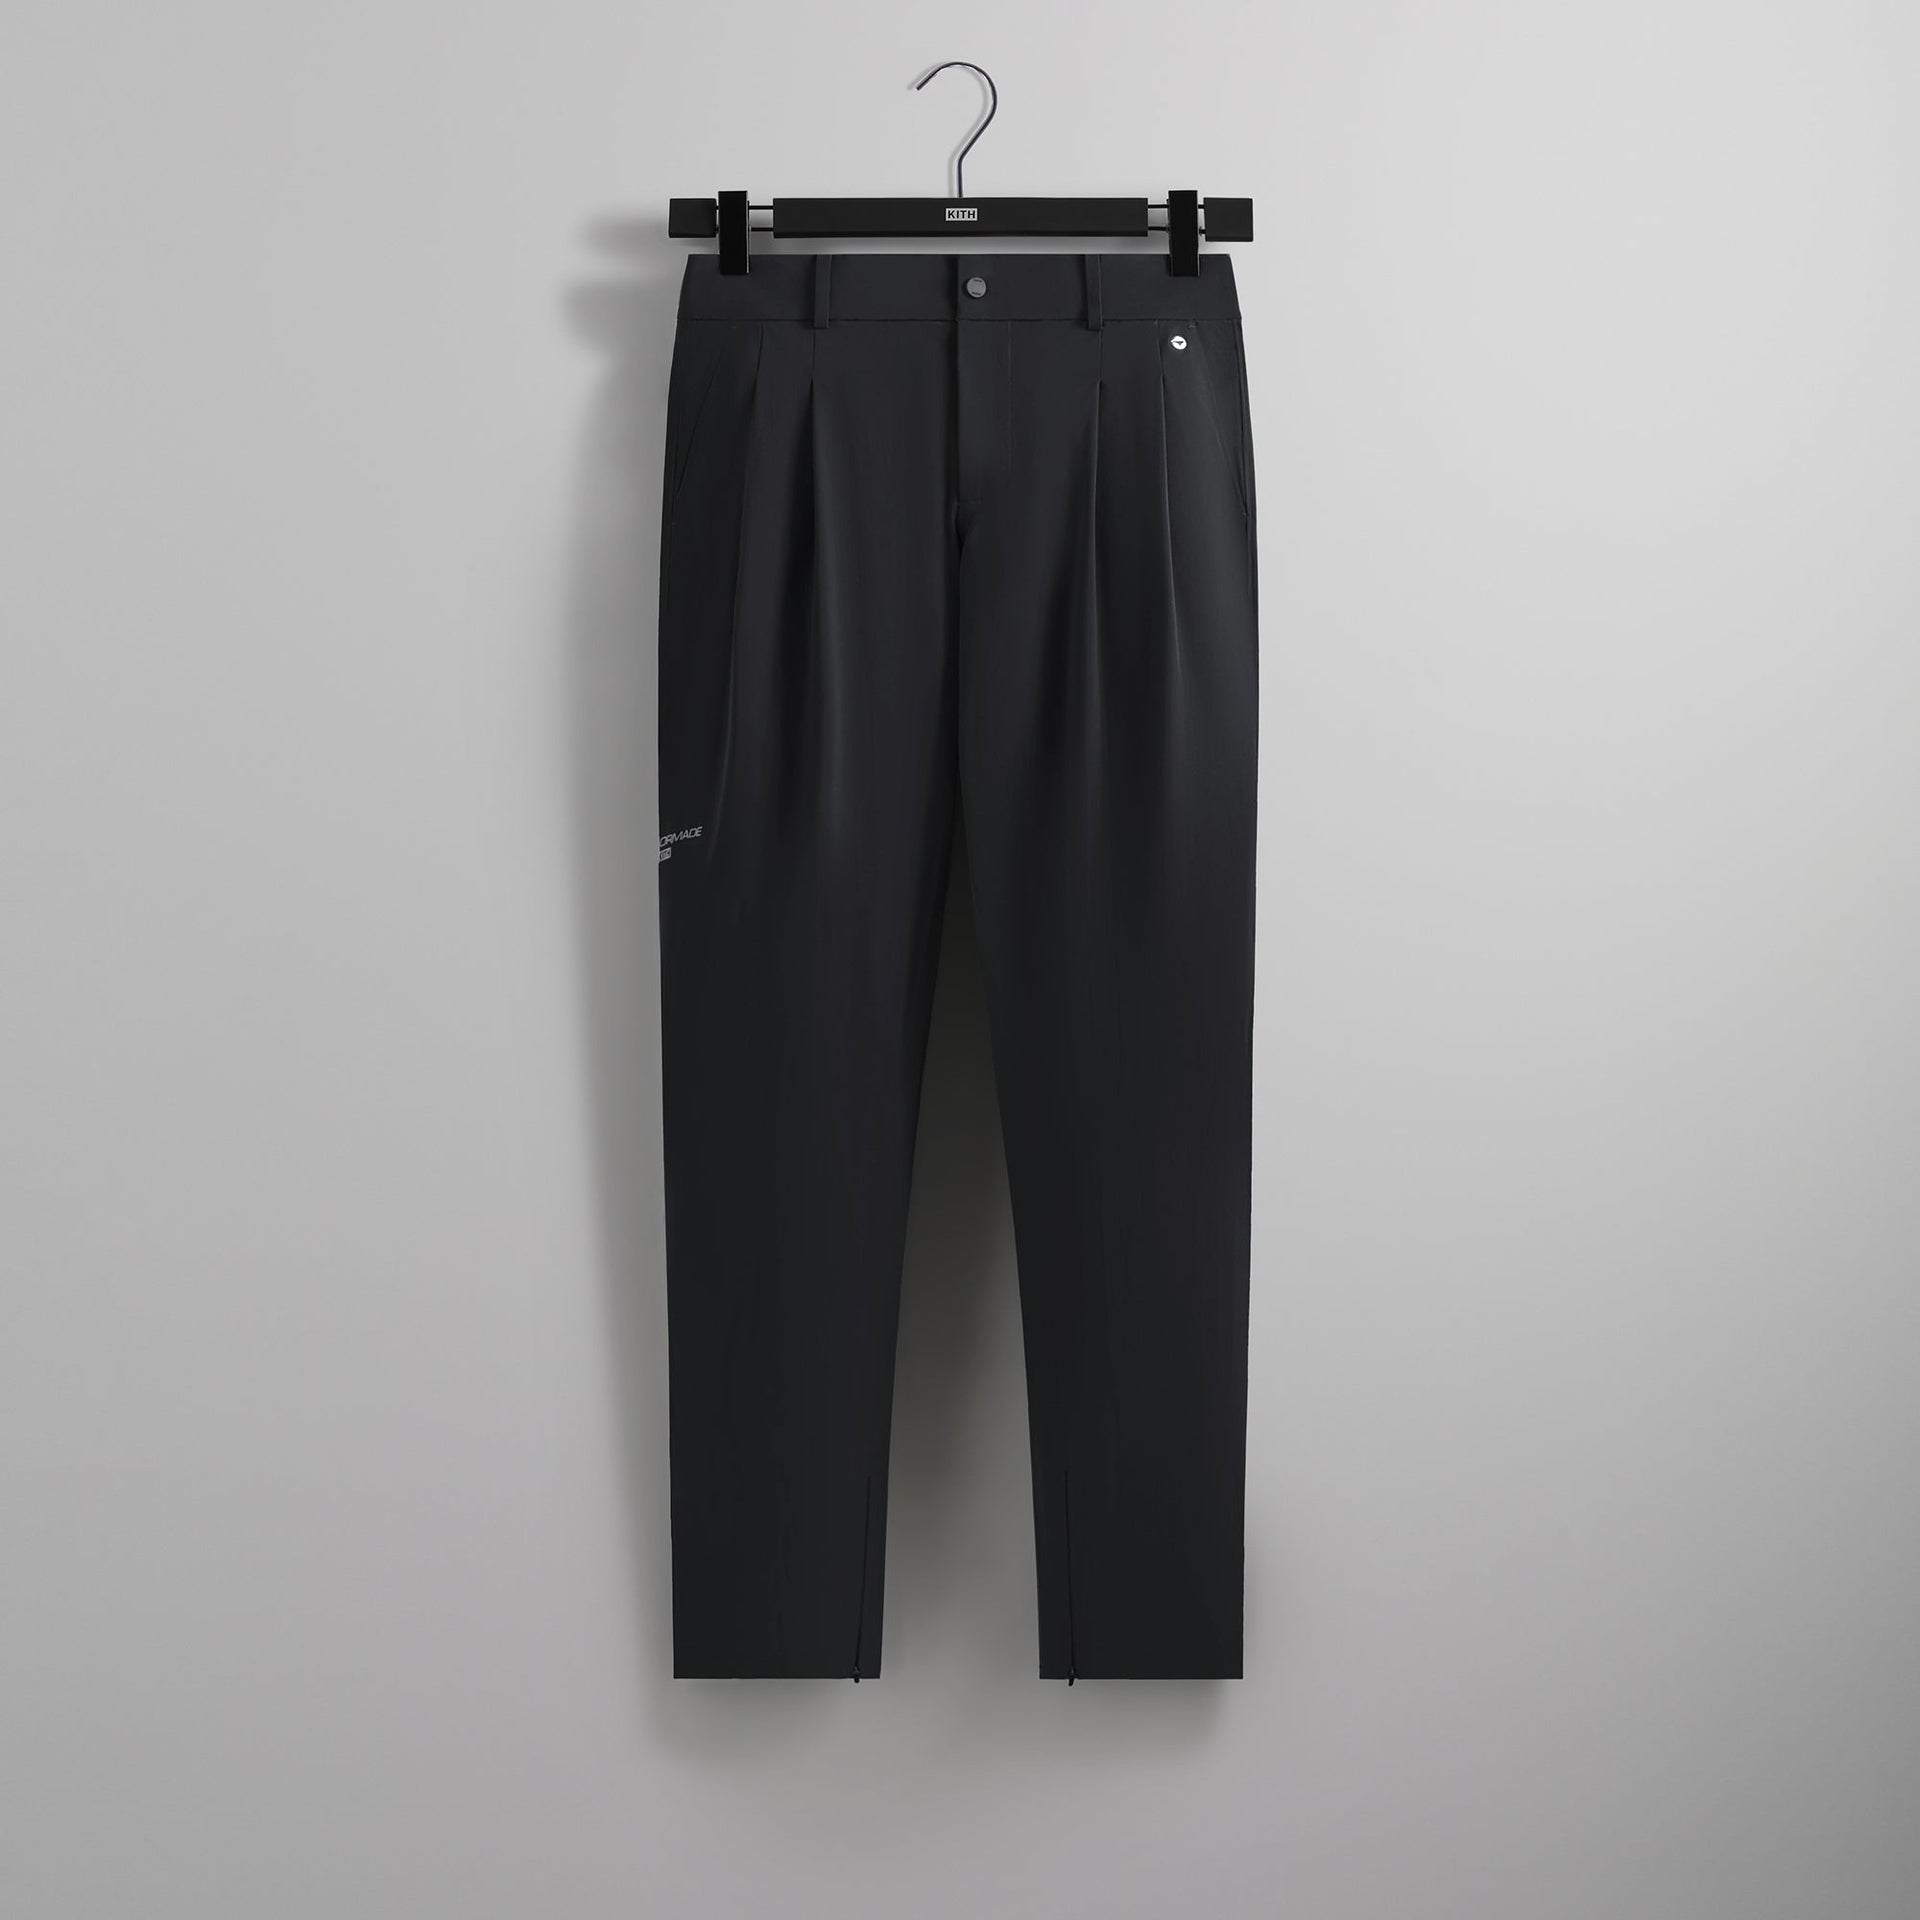 Kith for TaylorMade Mallet Pant - Black PH